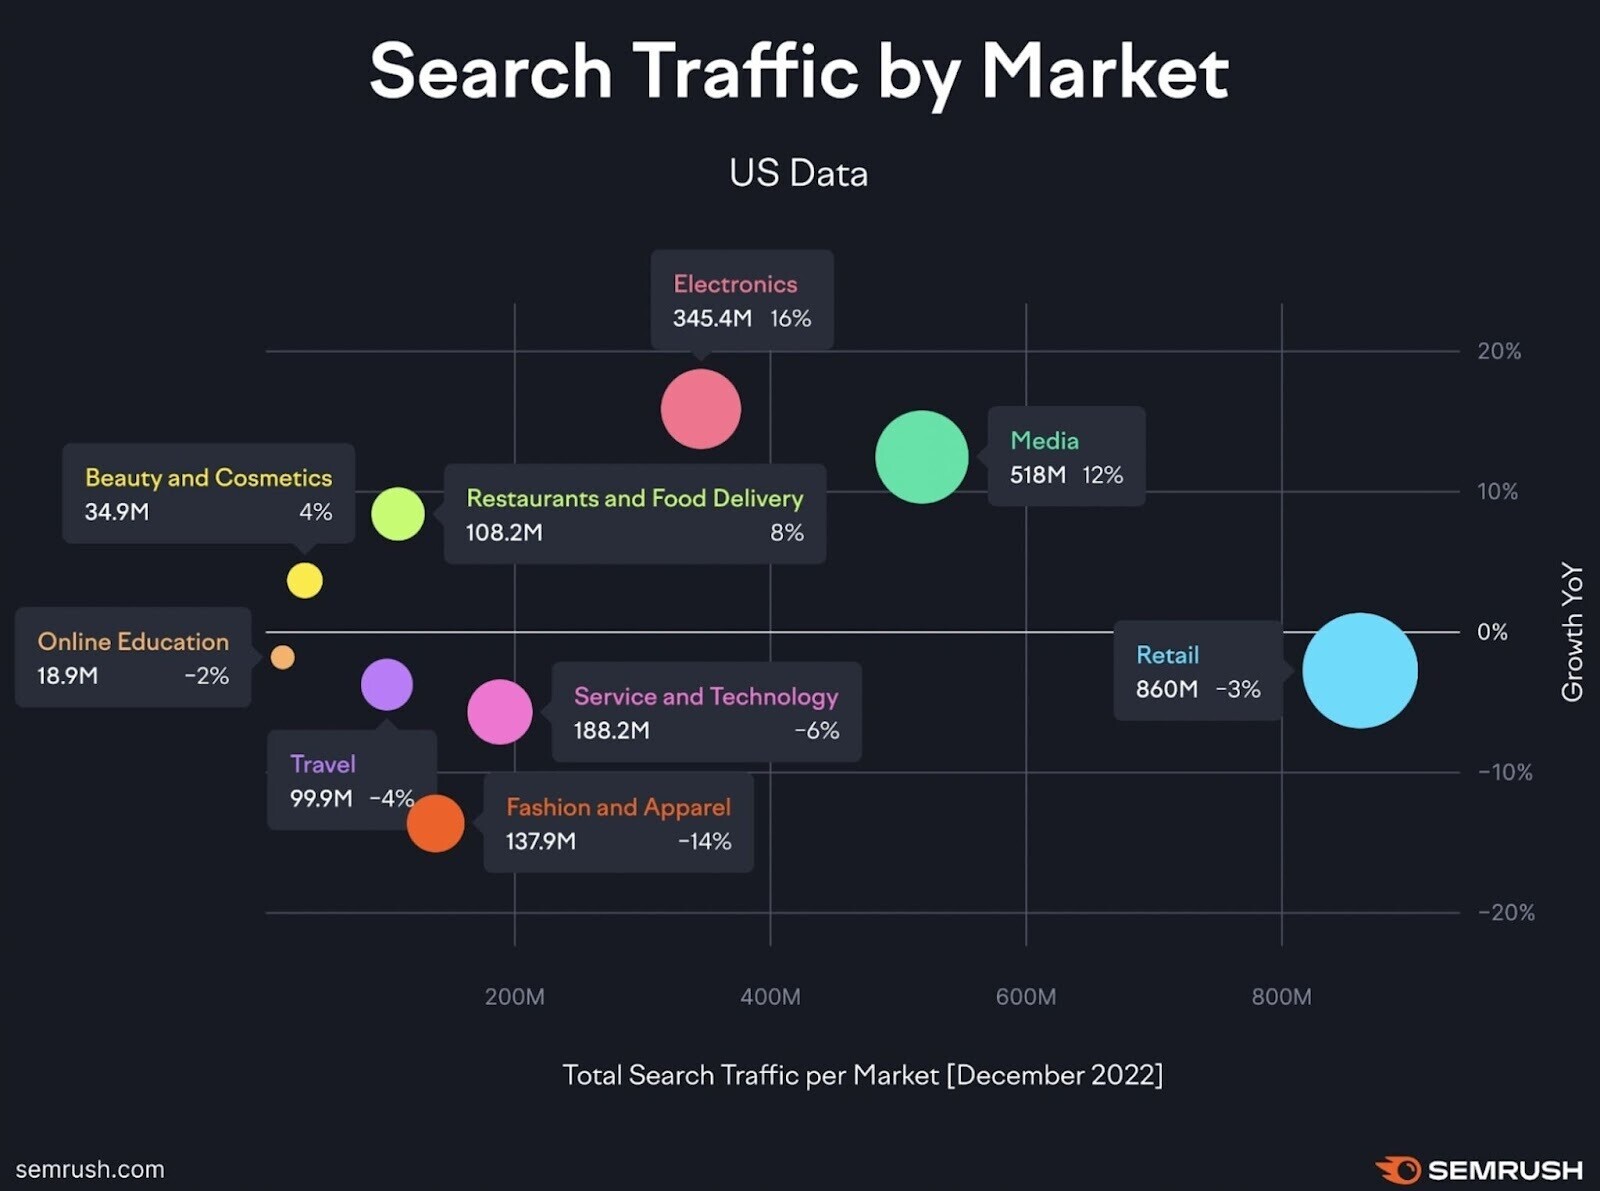 Search traffic by market - US Data